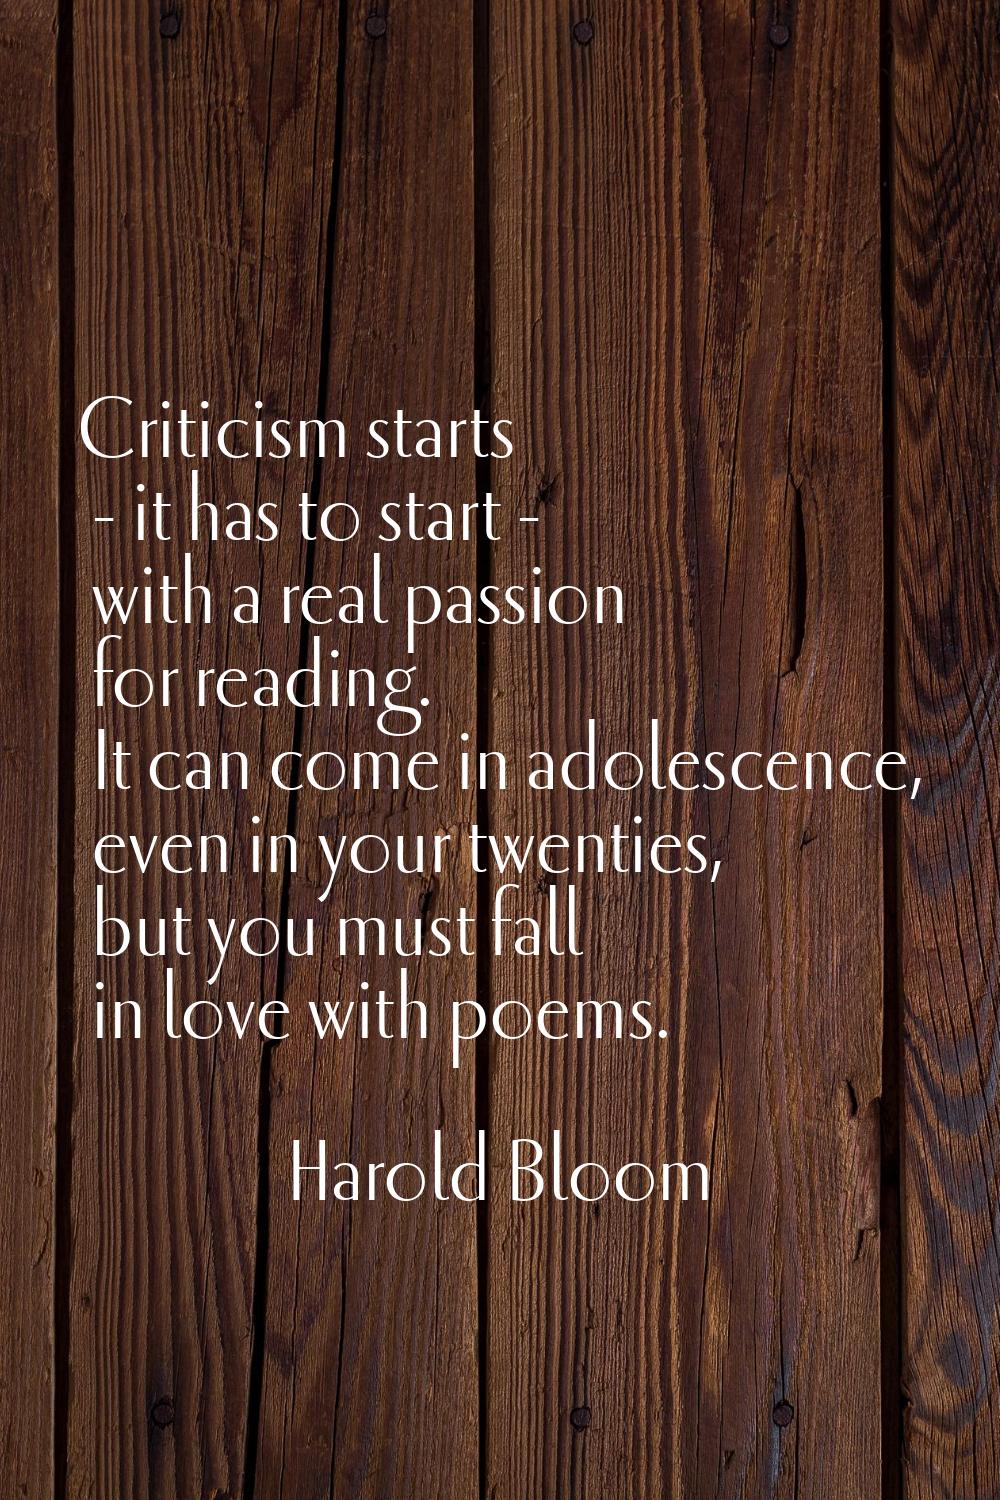 Criticism starts - it has to start - with a real passion for reading. It can come in adolescence, e